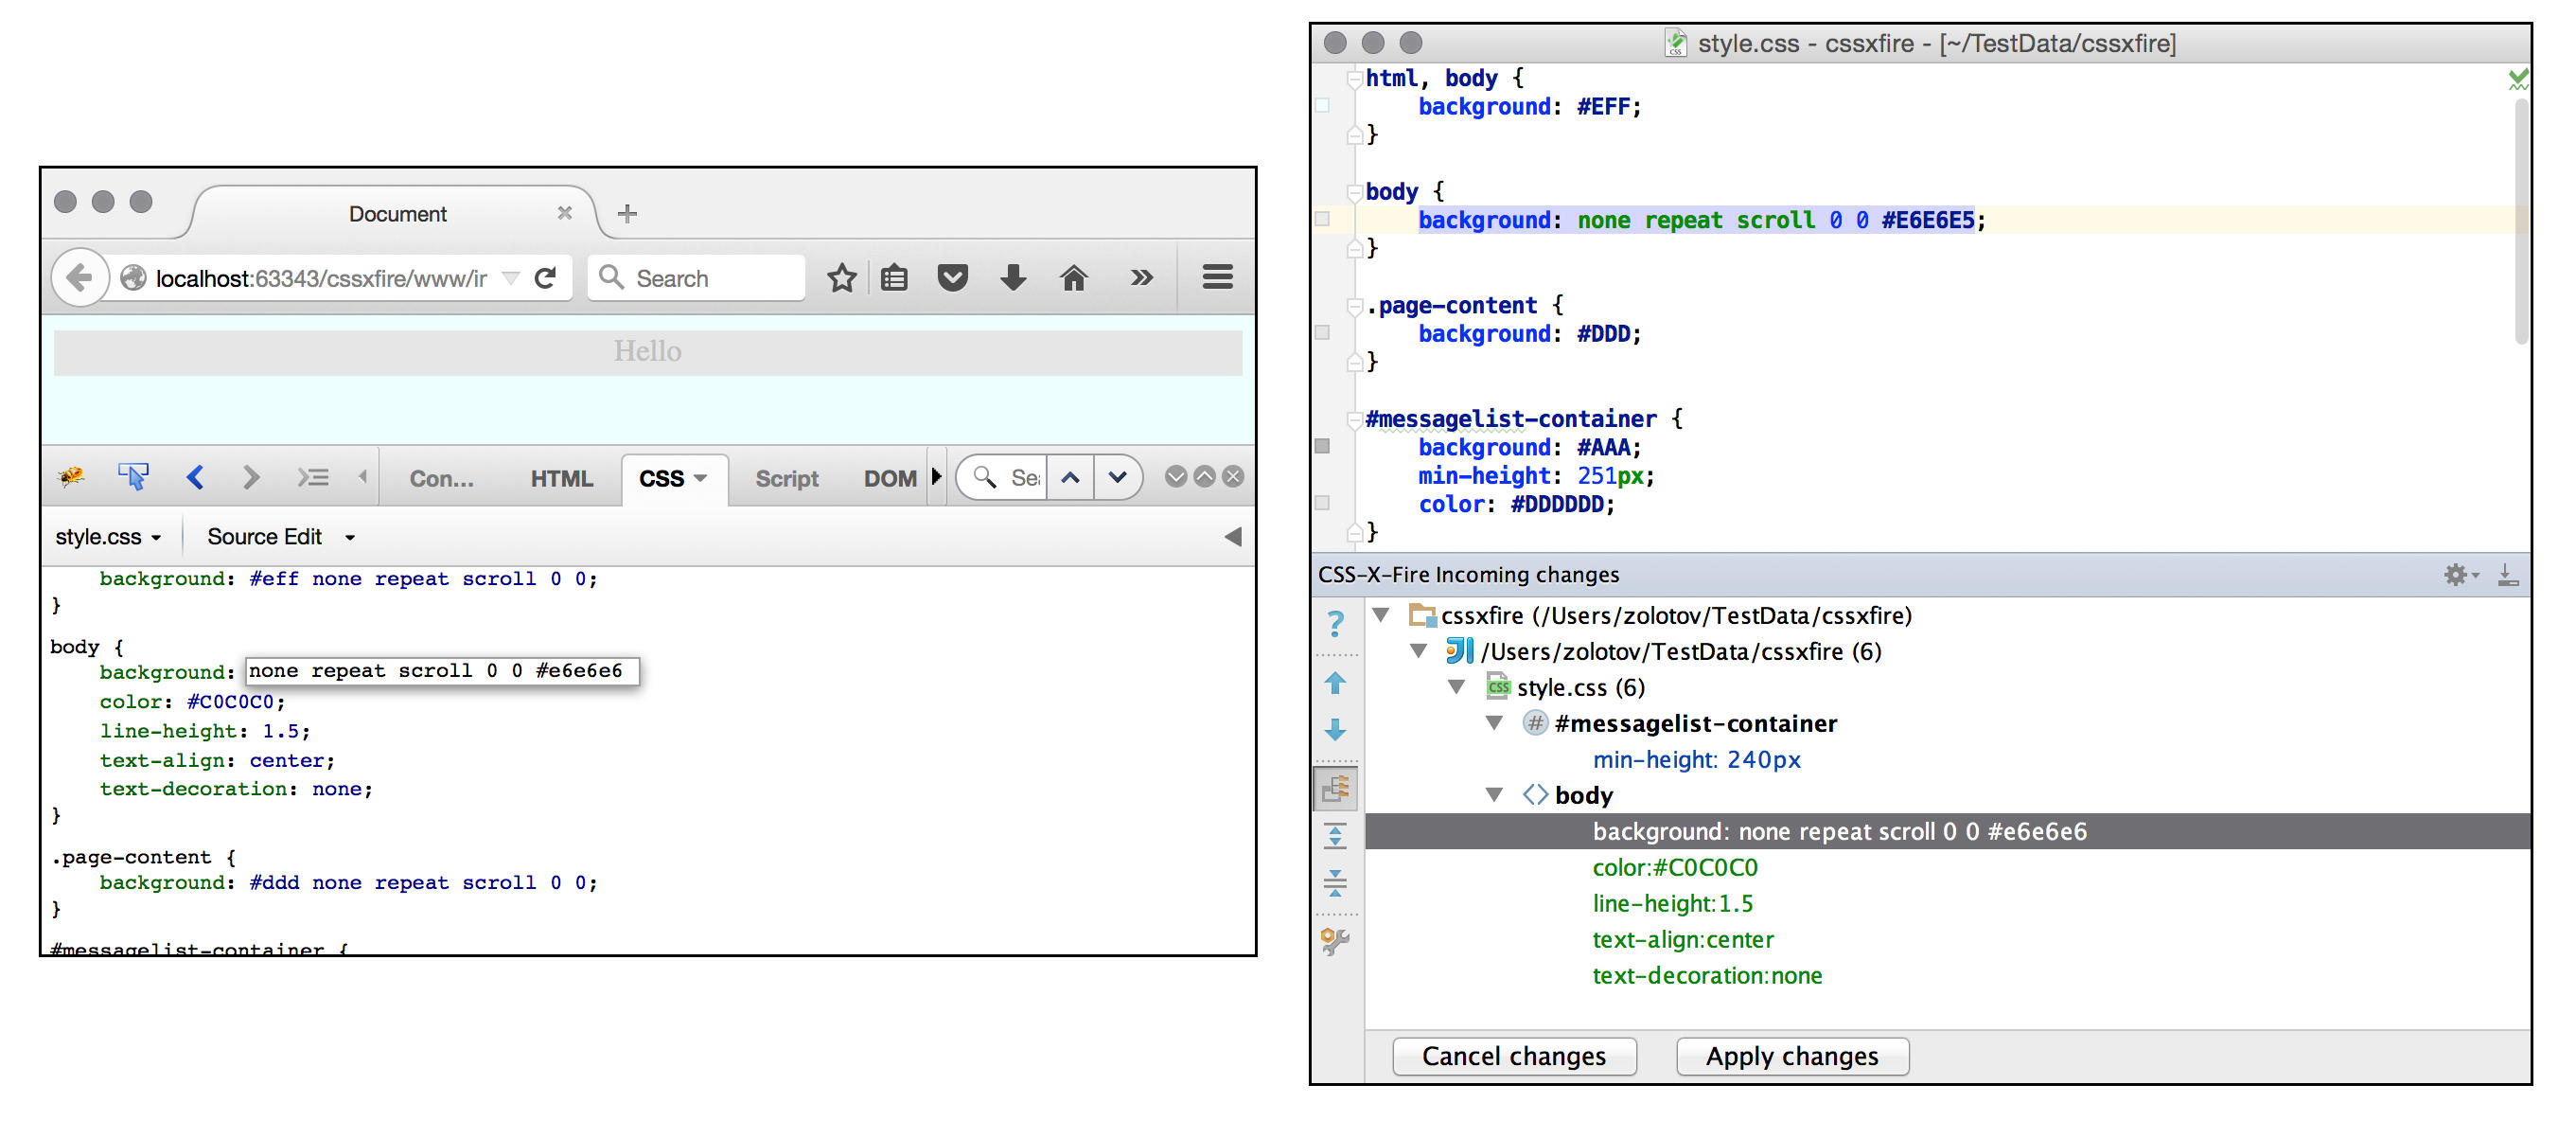 CSS-X-Fire: inspector on the left, WebStorm on the right